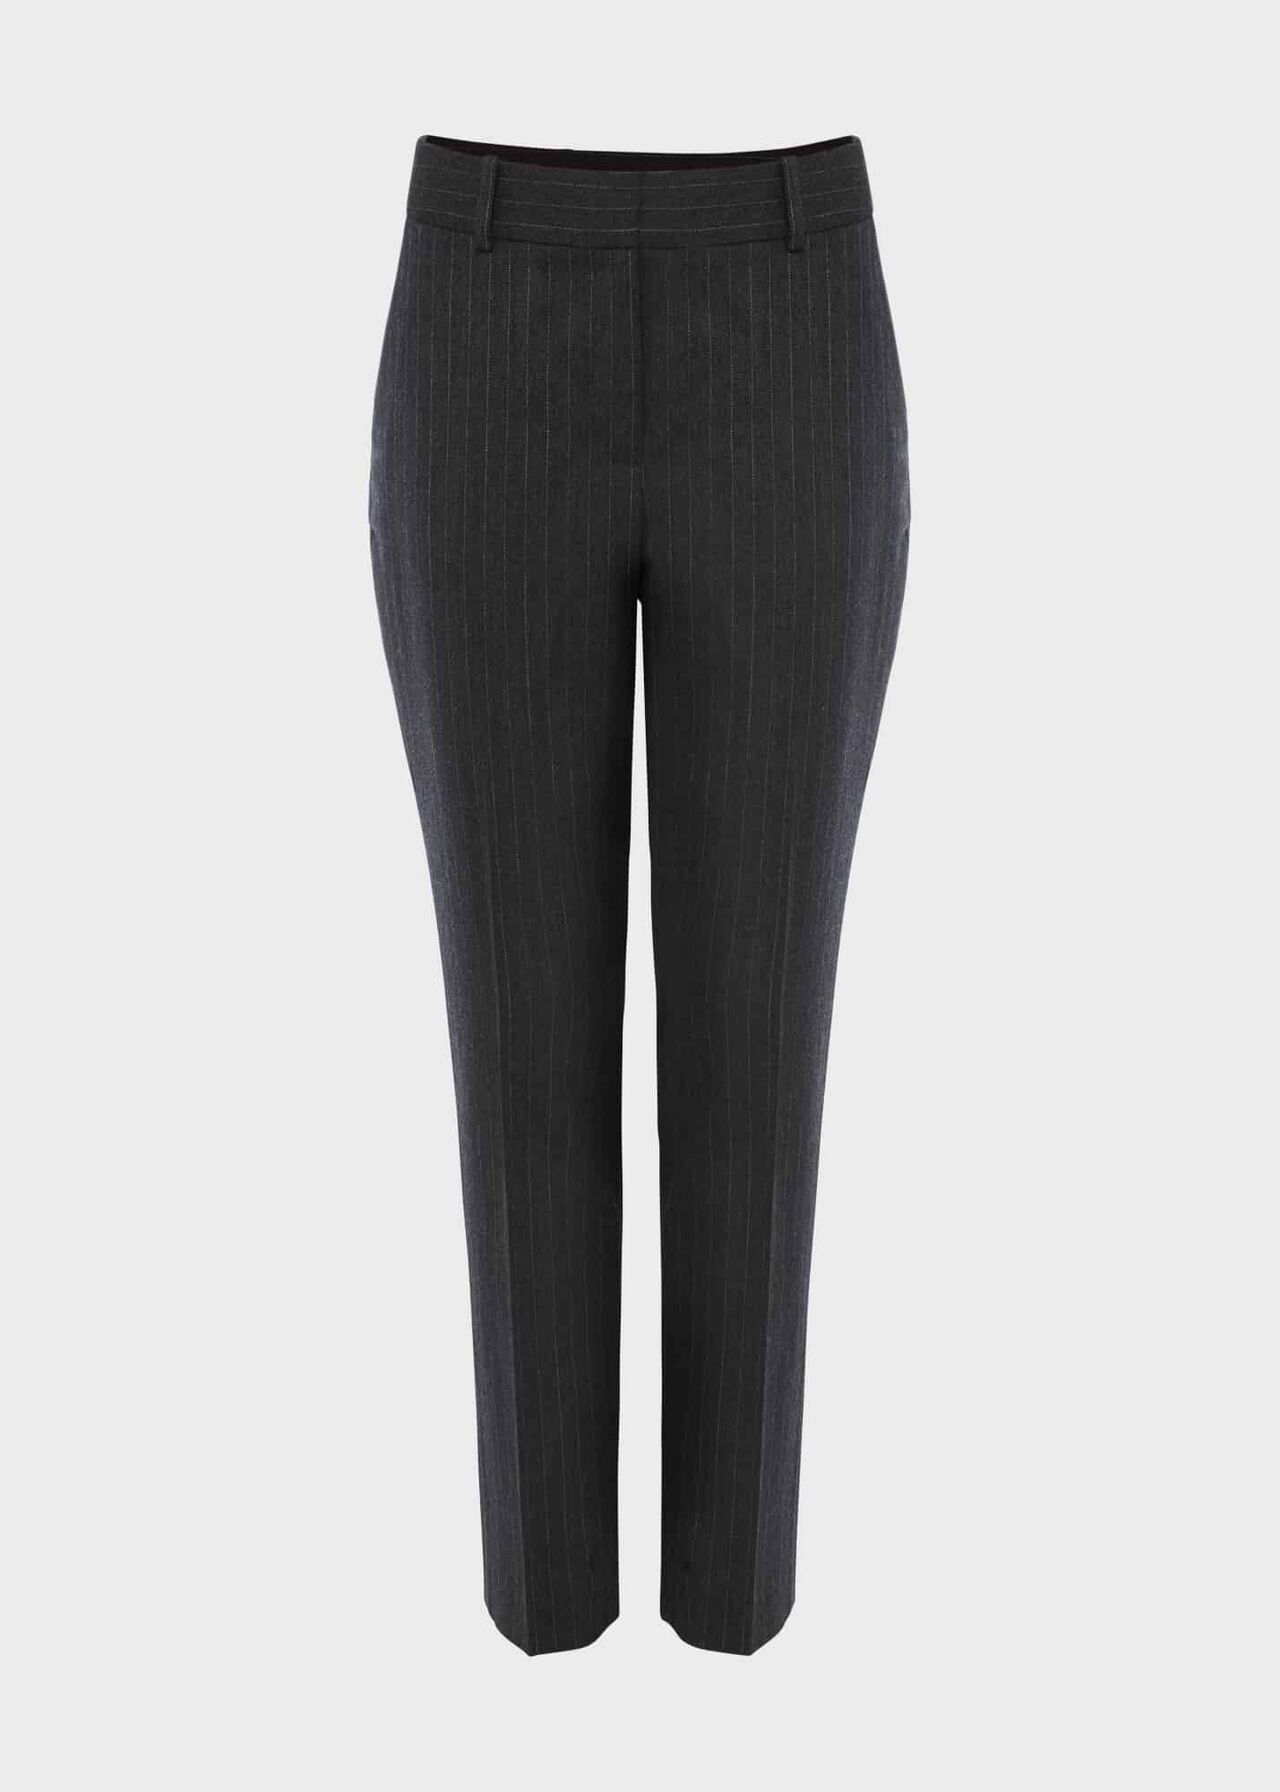 Chelsea Trousers, Charcoal Ivory, hi-res